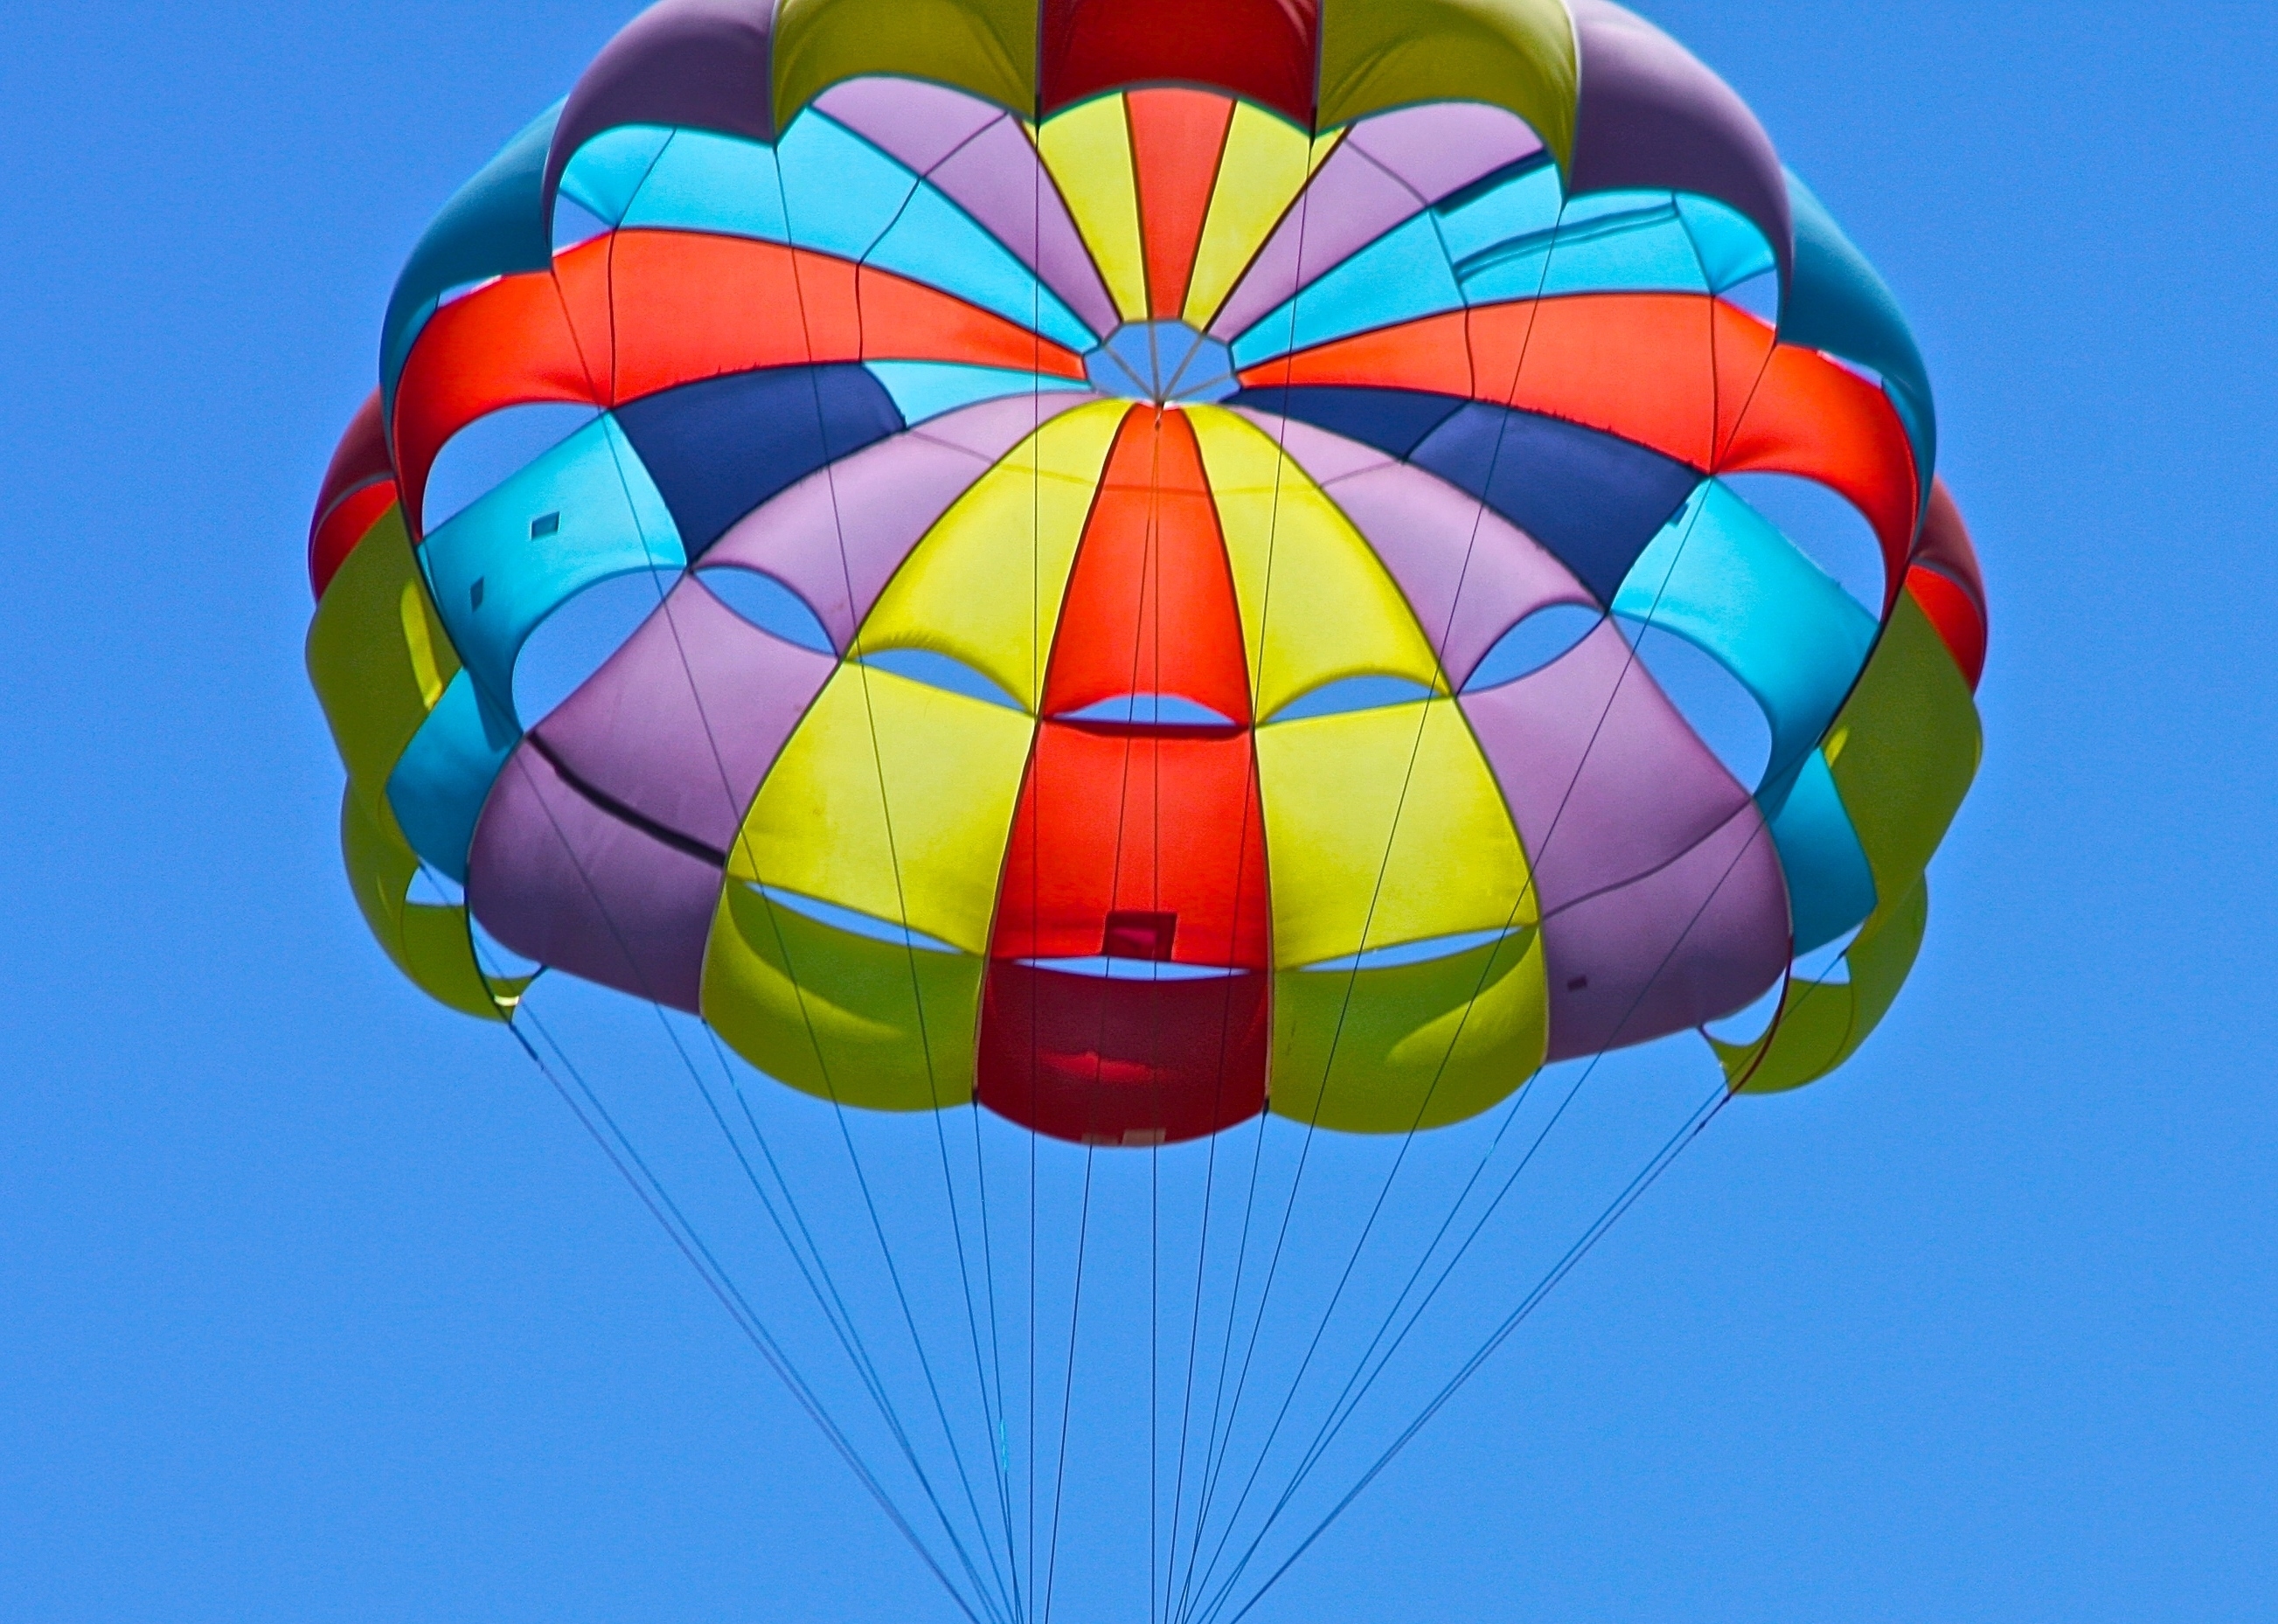 This is a decorative photo image of a parachute.